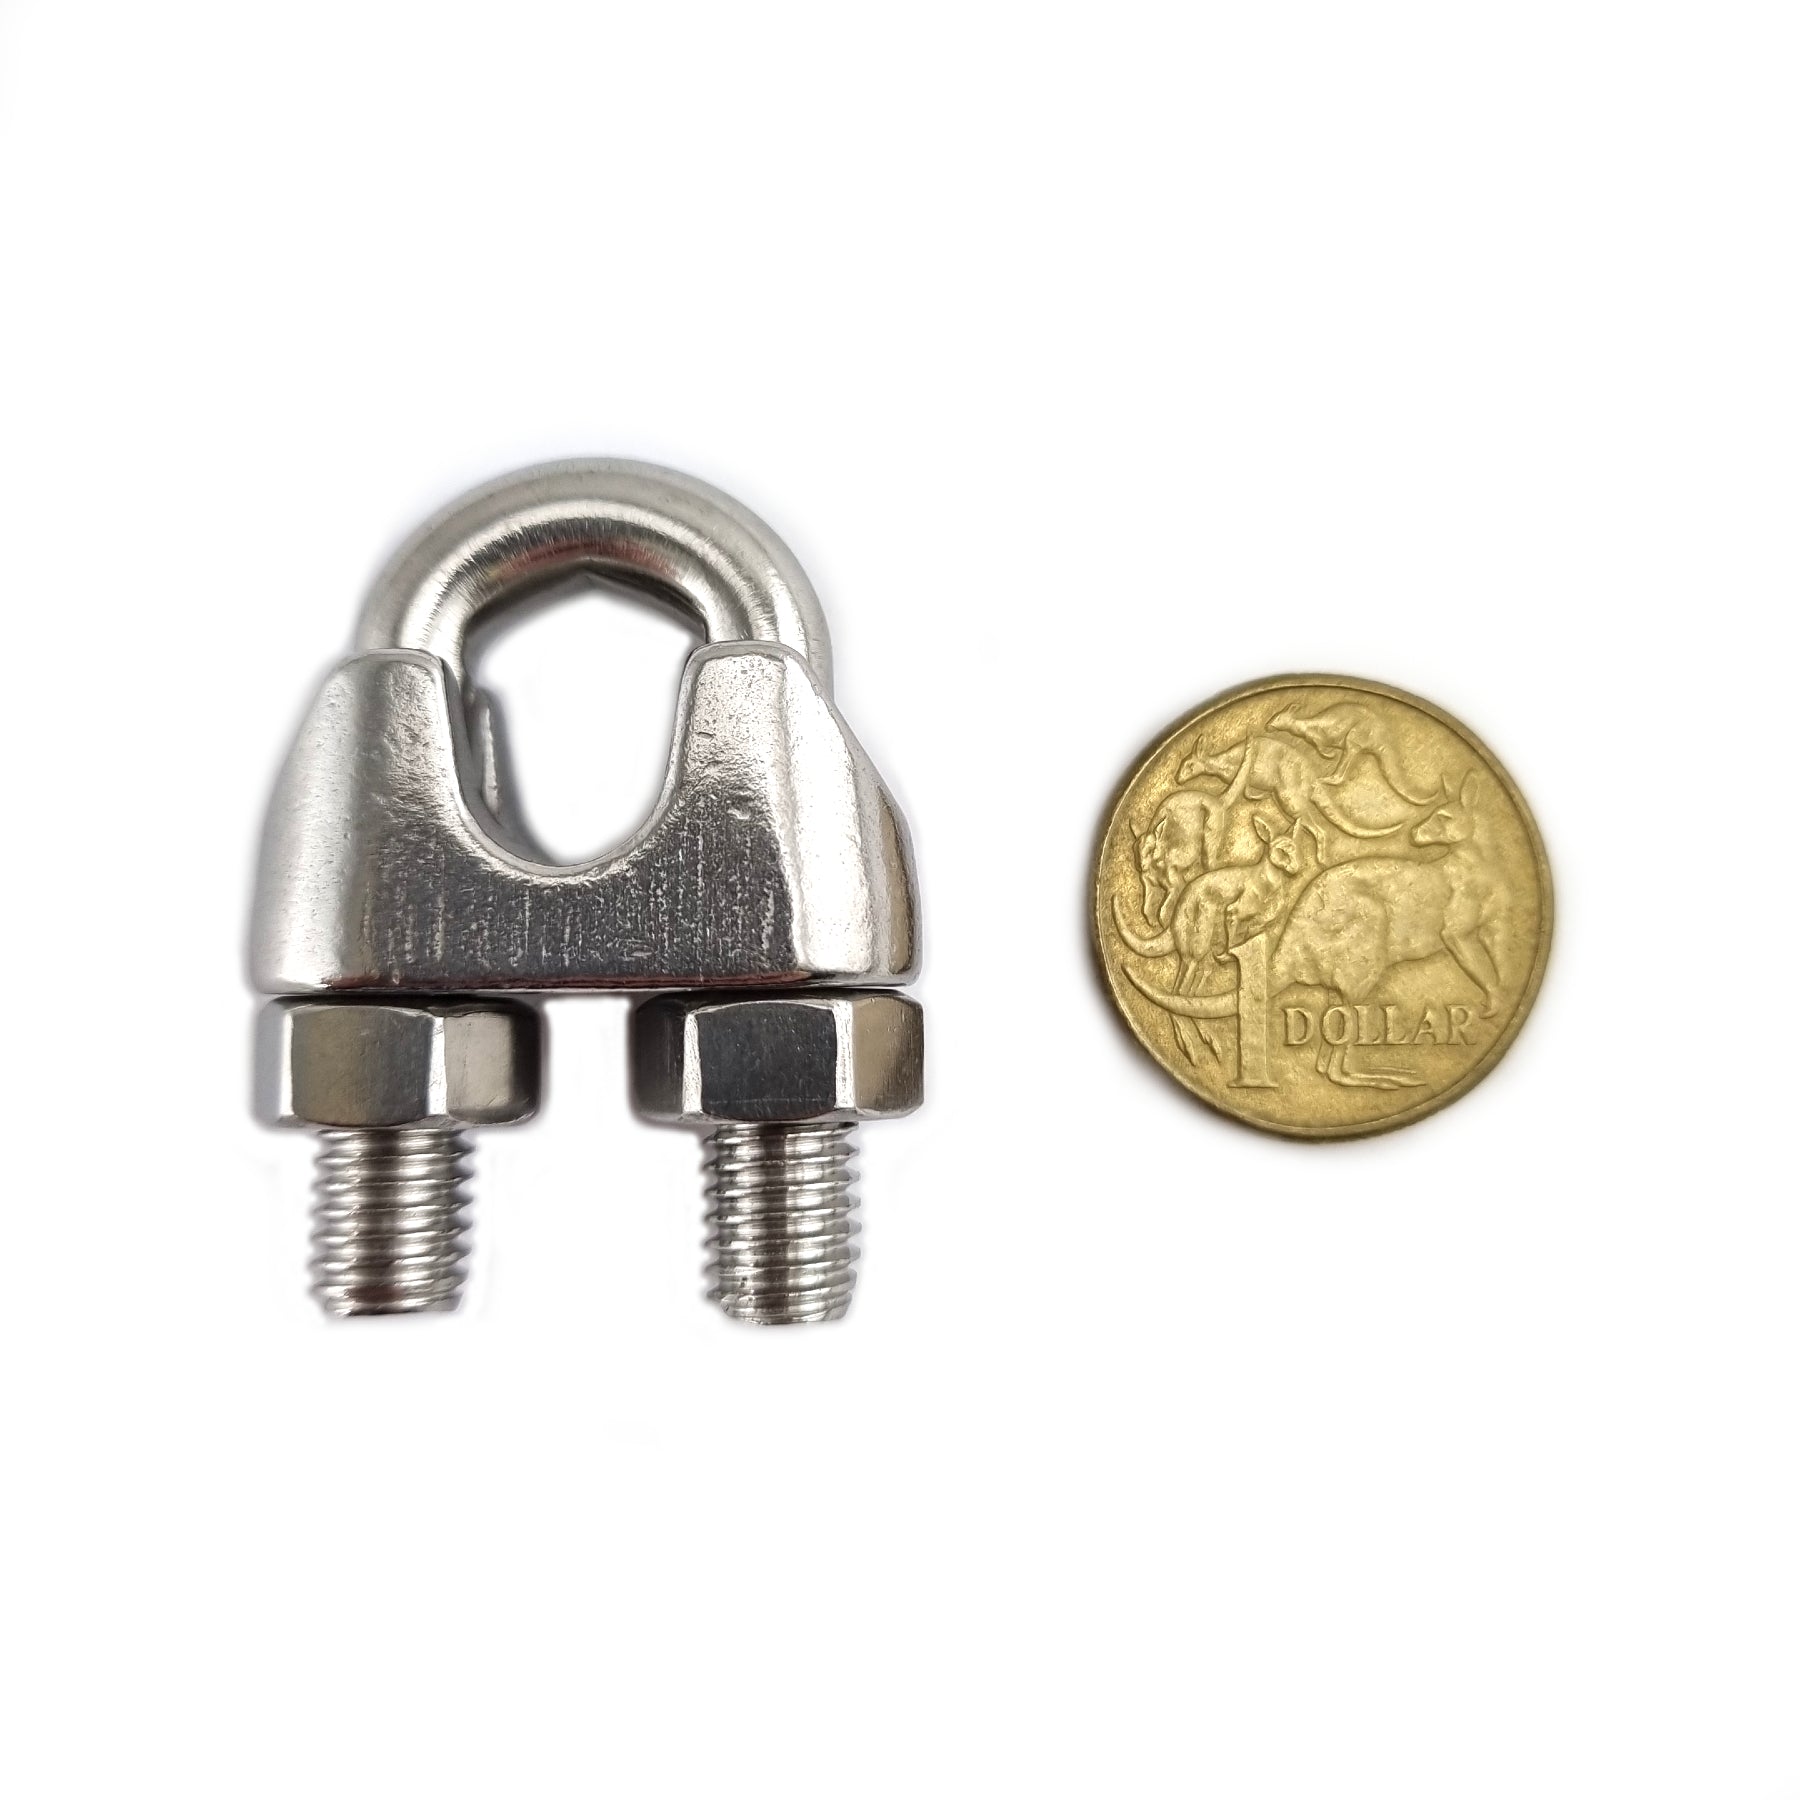 Stainless steel type 316 cable clamp, size 10mm. Shop online chain.com.au